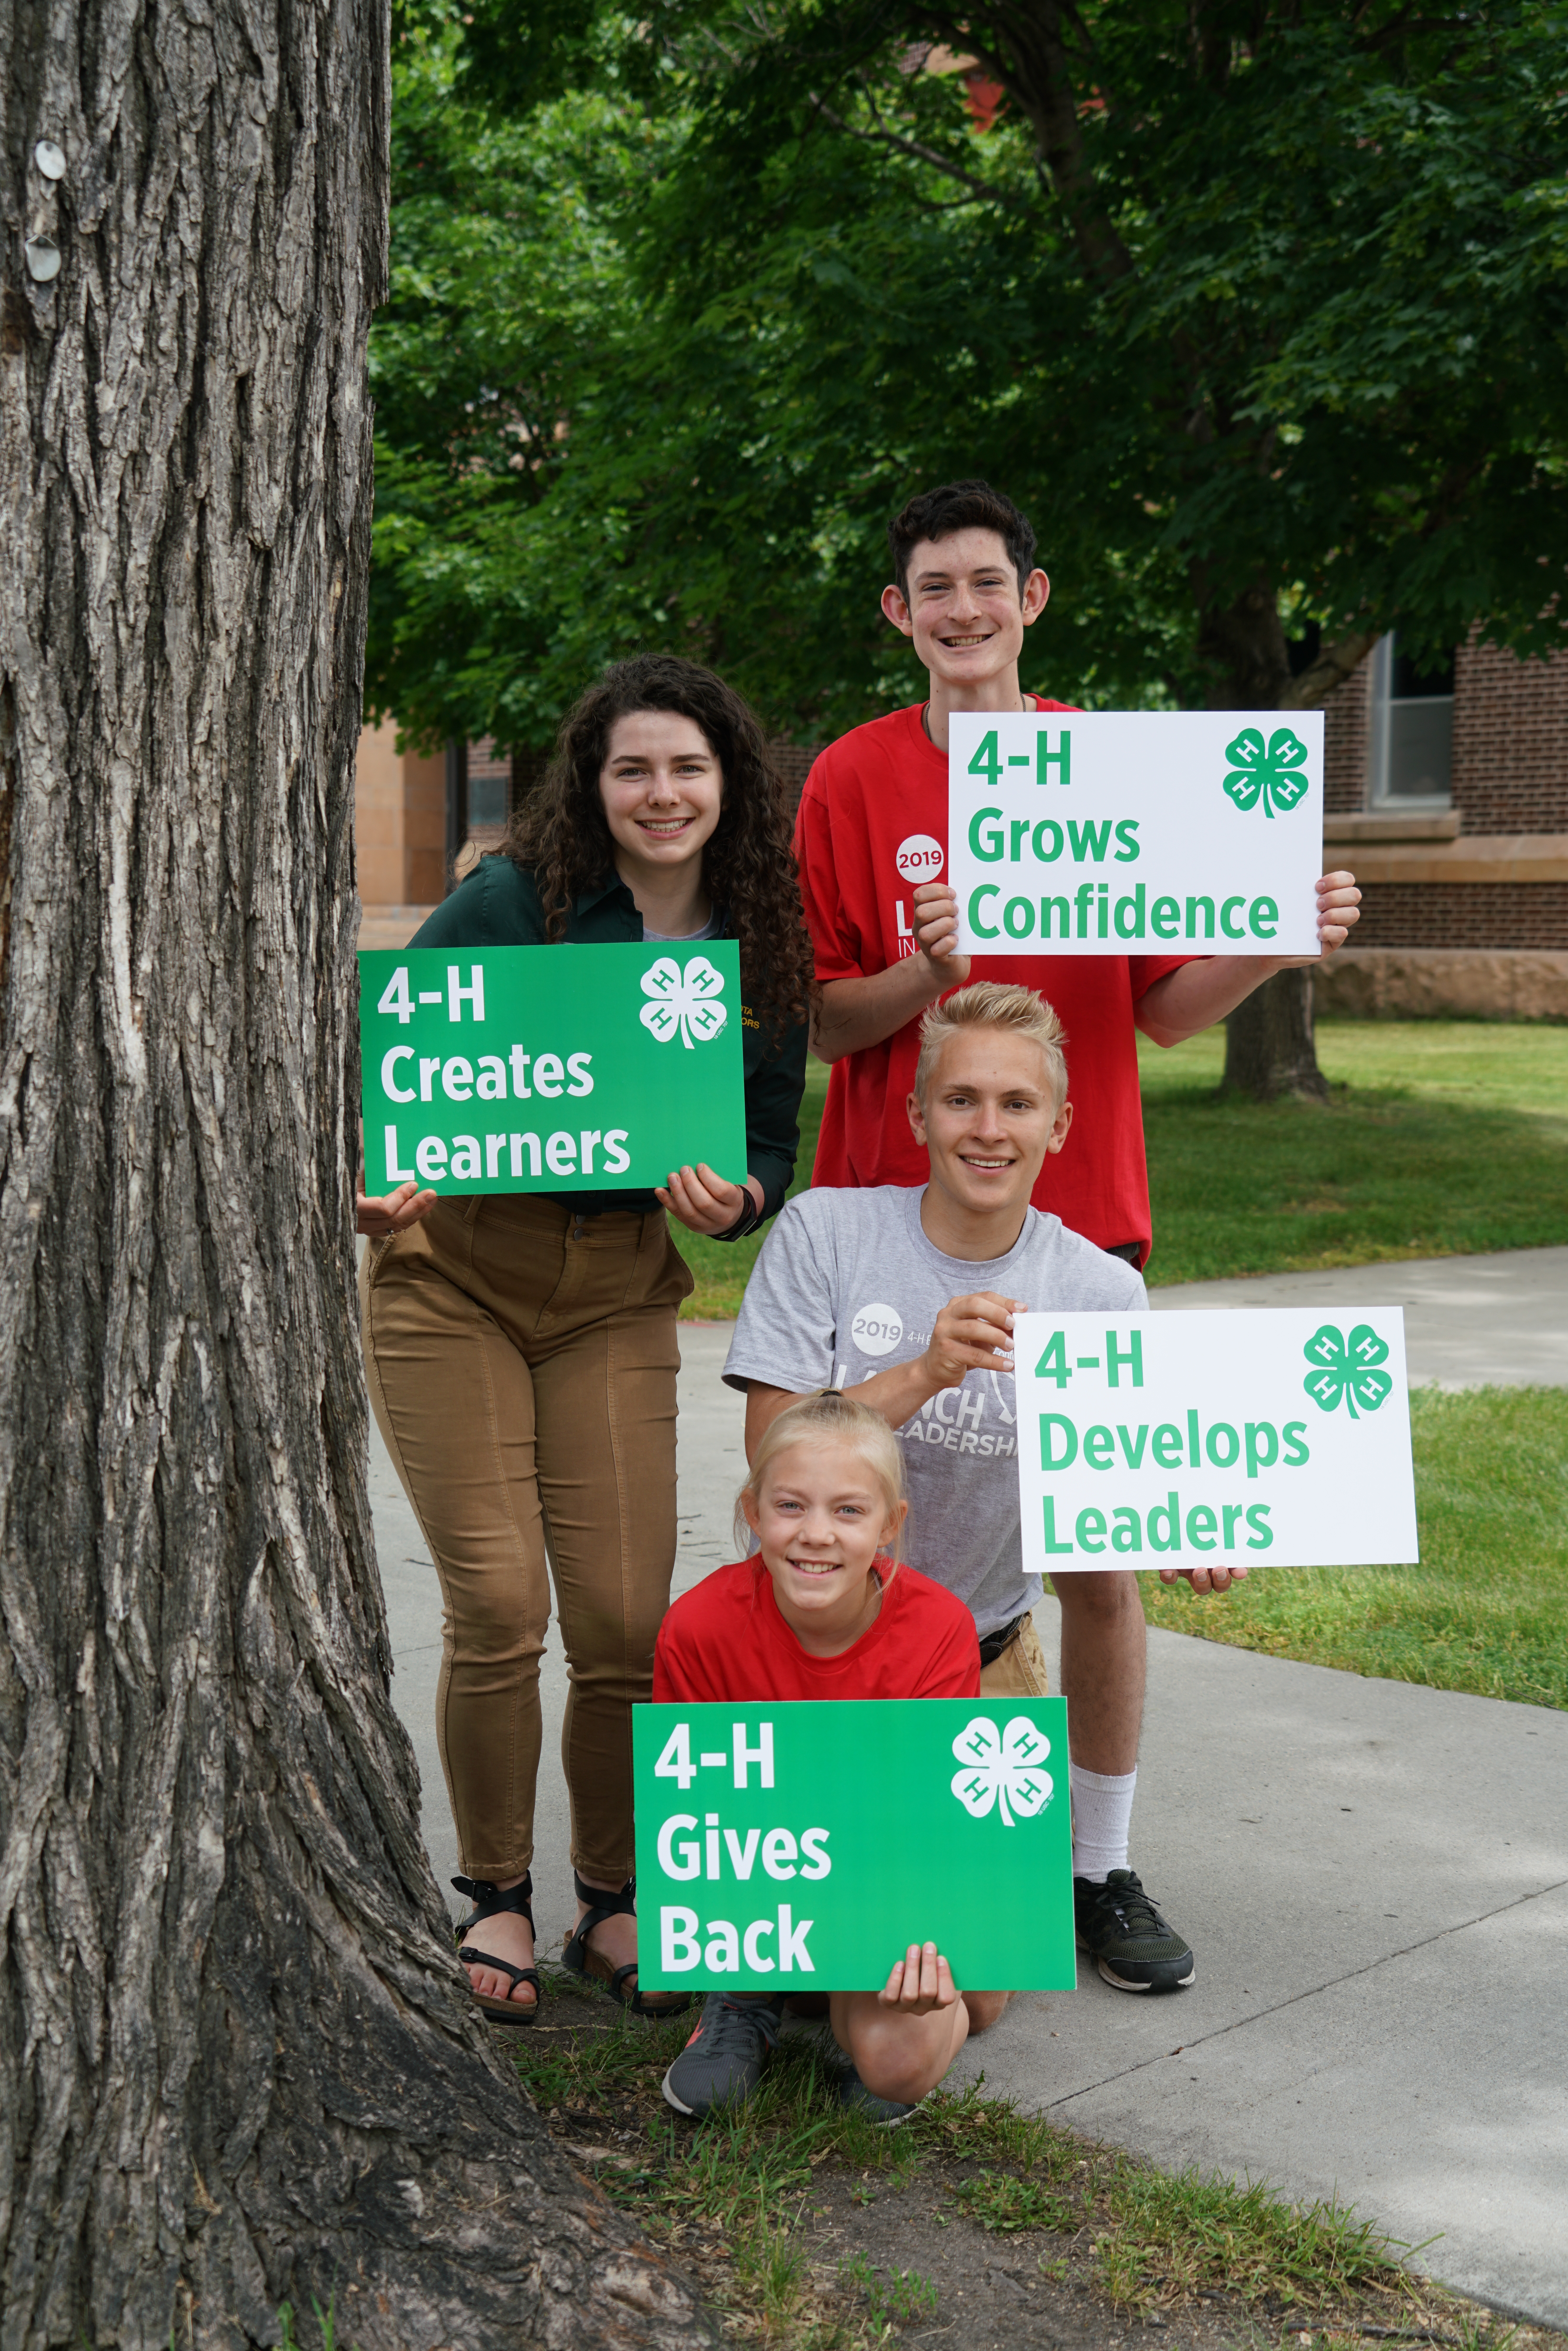 Donations to the North Dakota 4-H Foundation will help 4-H members across North Dakota build confidence, creativity and curiosity through hands-on learning. (NDSU photo)